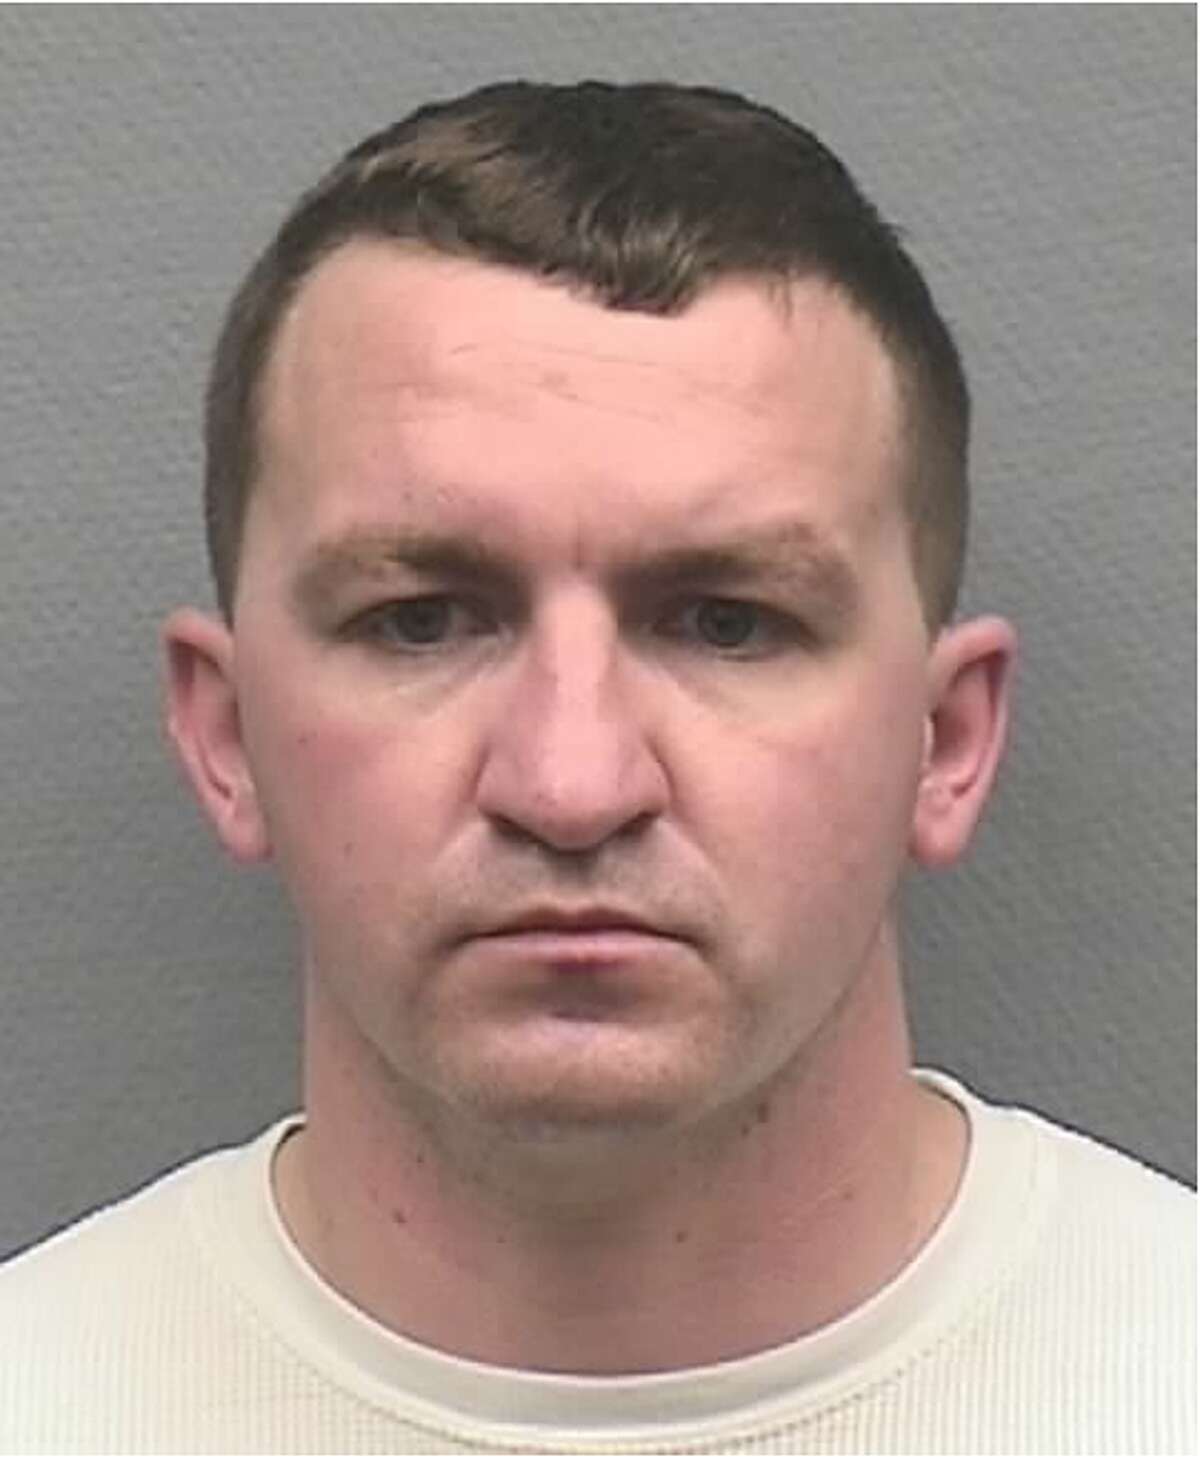 Andrew Turley, 30, was convicted for trafficking of a child and compelling prostitution of someone under the age of 18. >> See Houston neighborhoods with the most registered sex offenders...